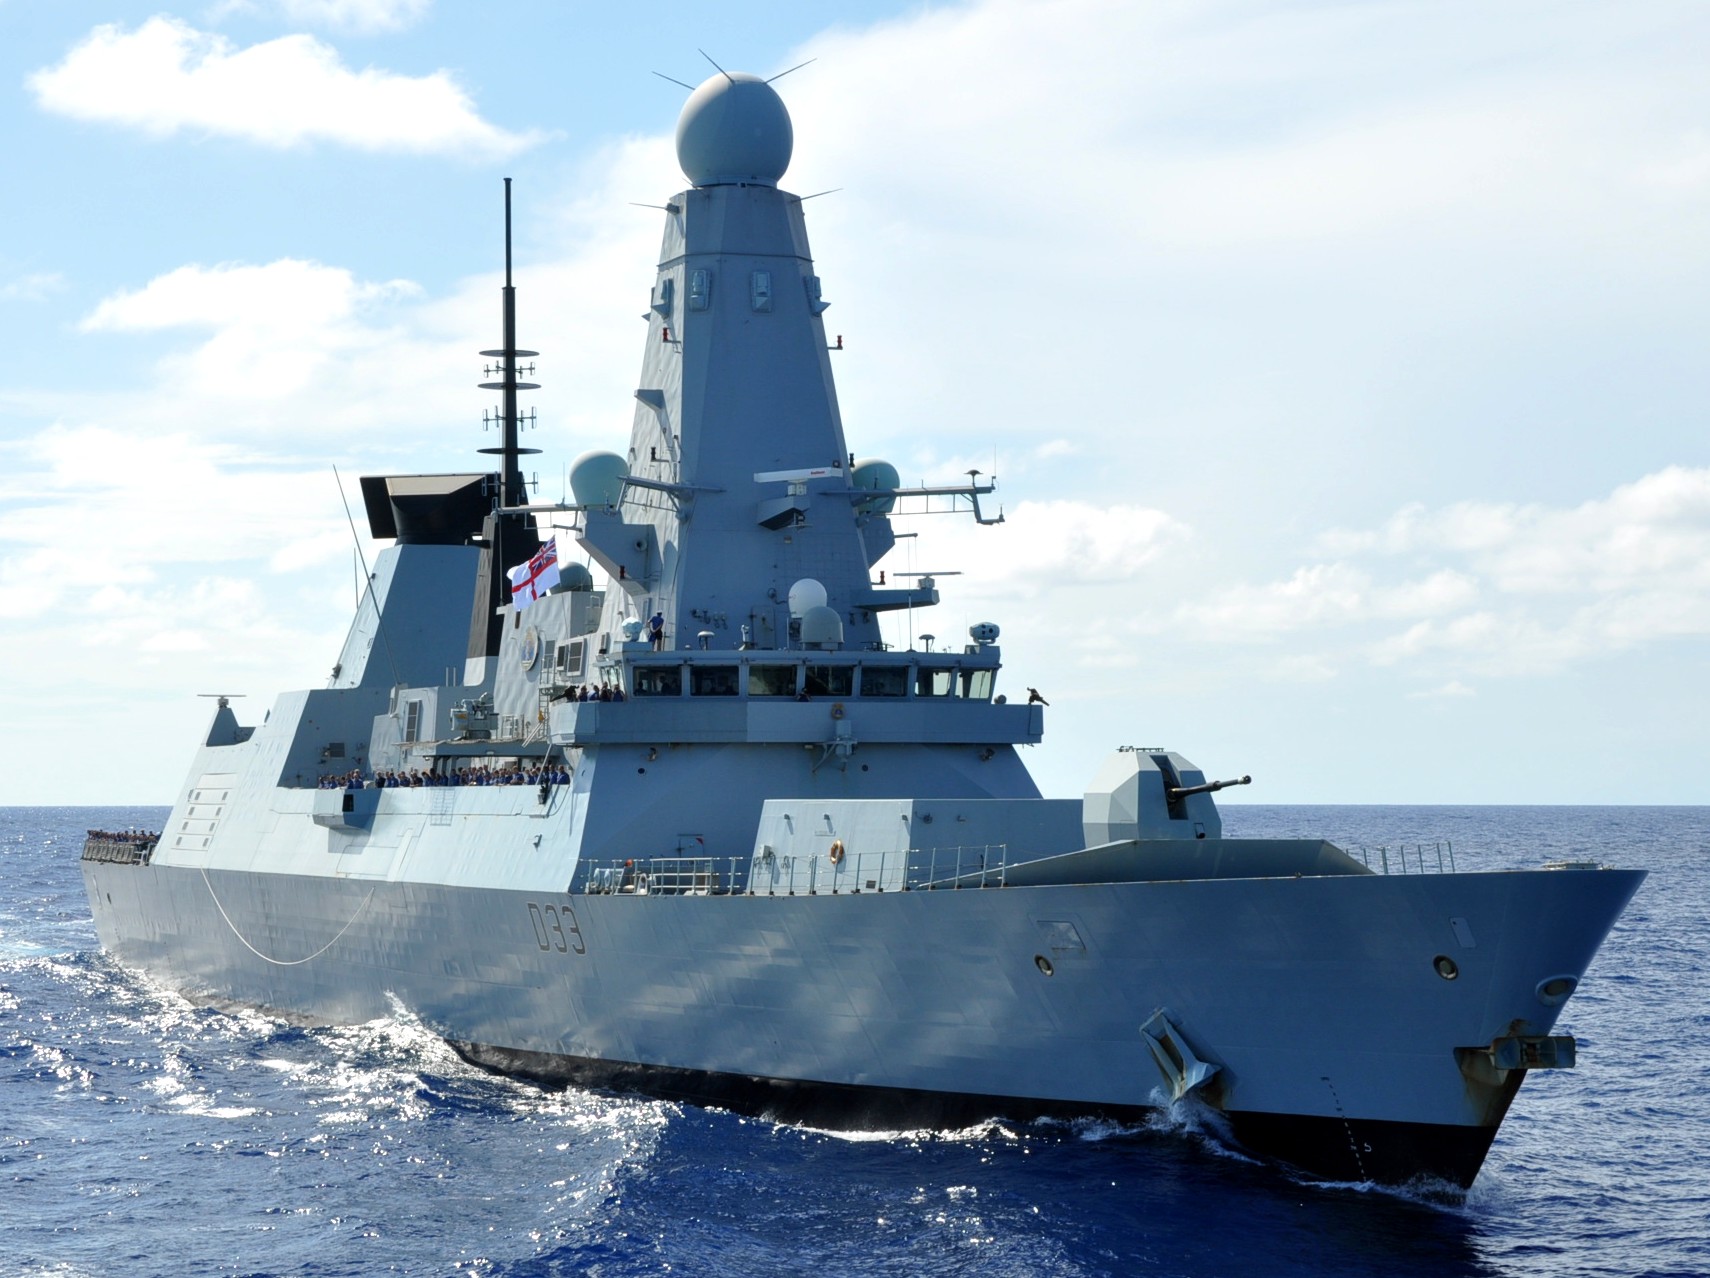 hms dauntless d-33 type 45 daring class guided missile destroyer royal navy sea viper paams 02